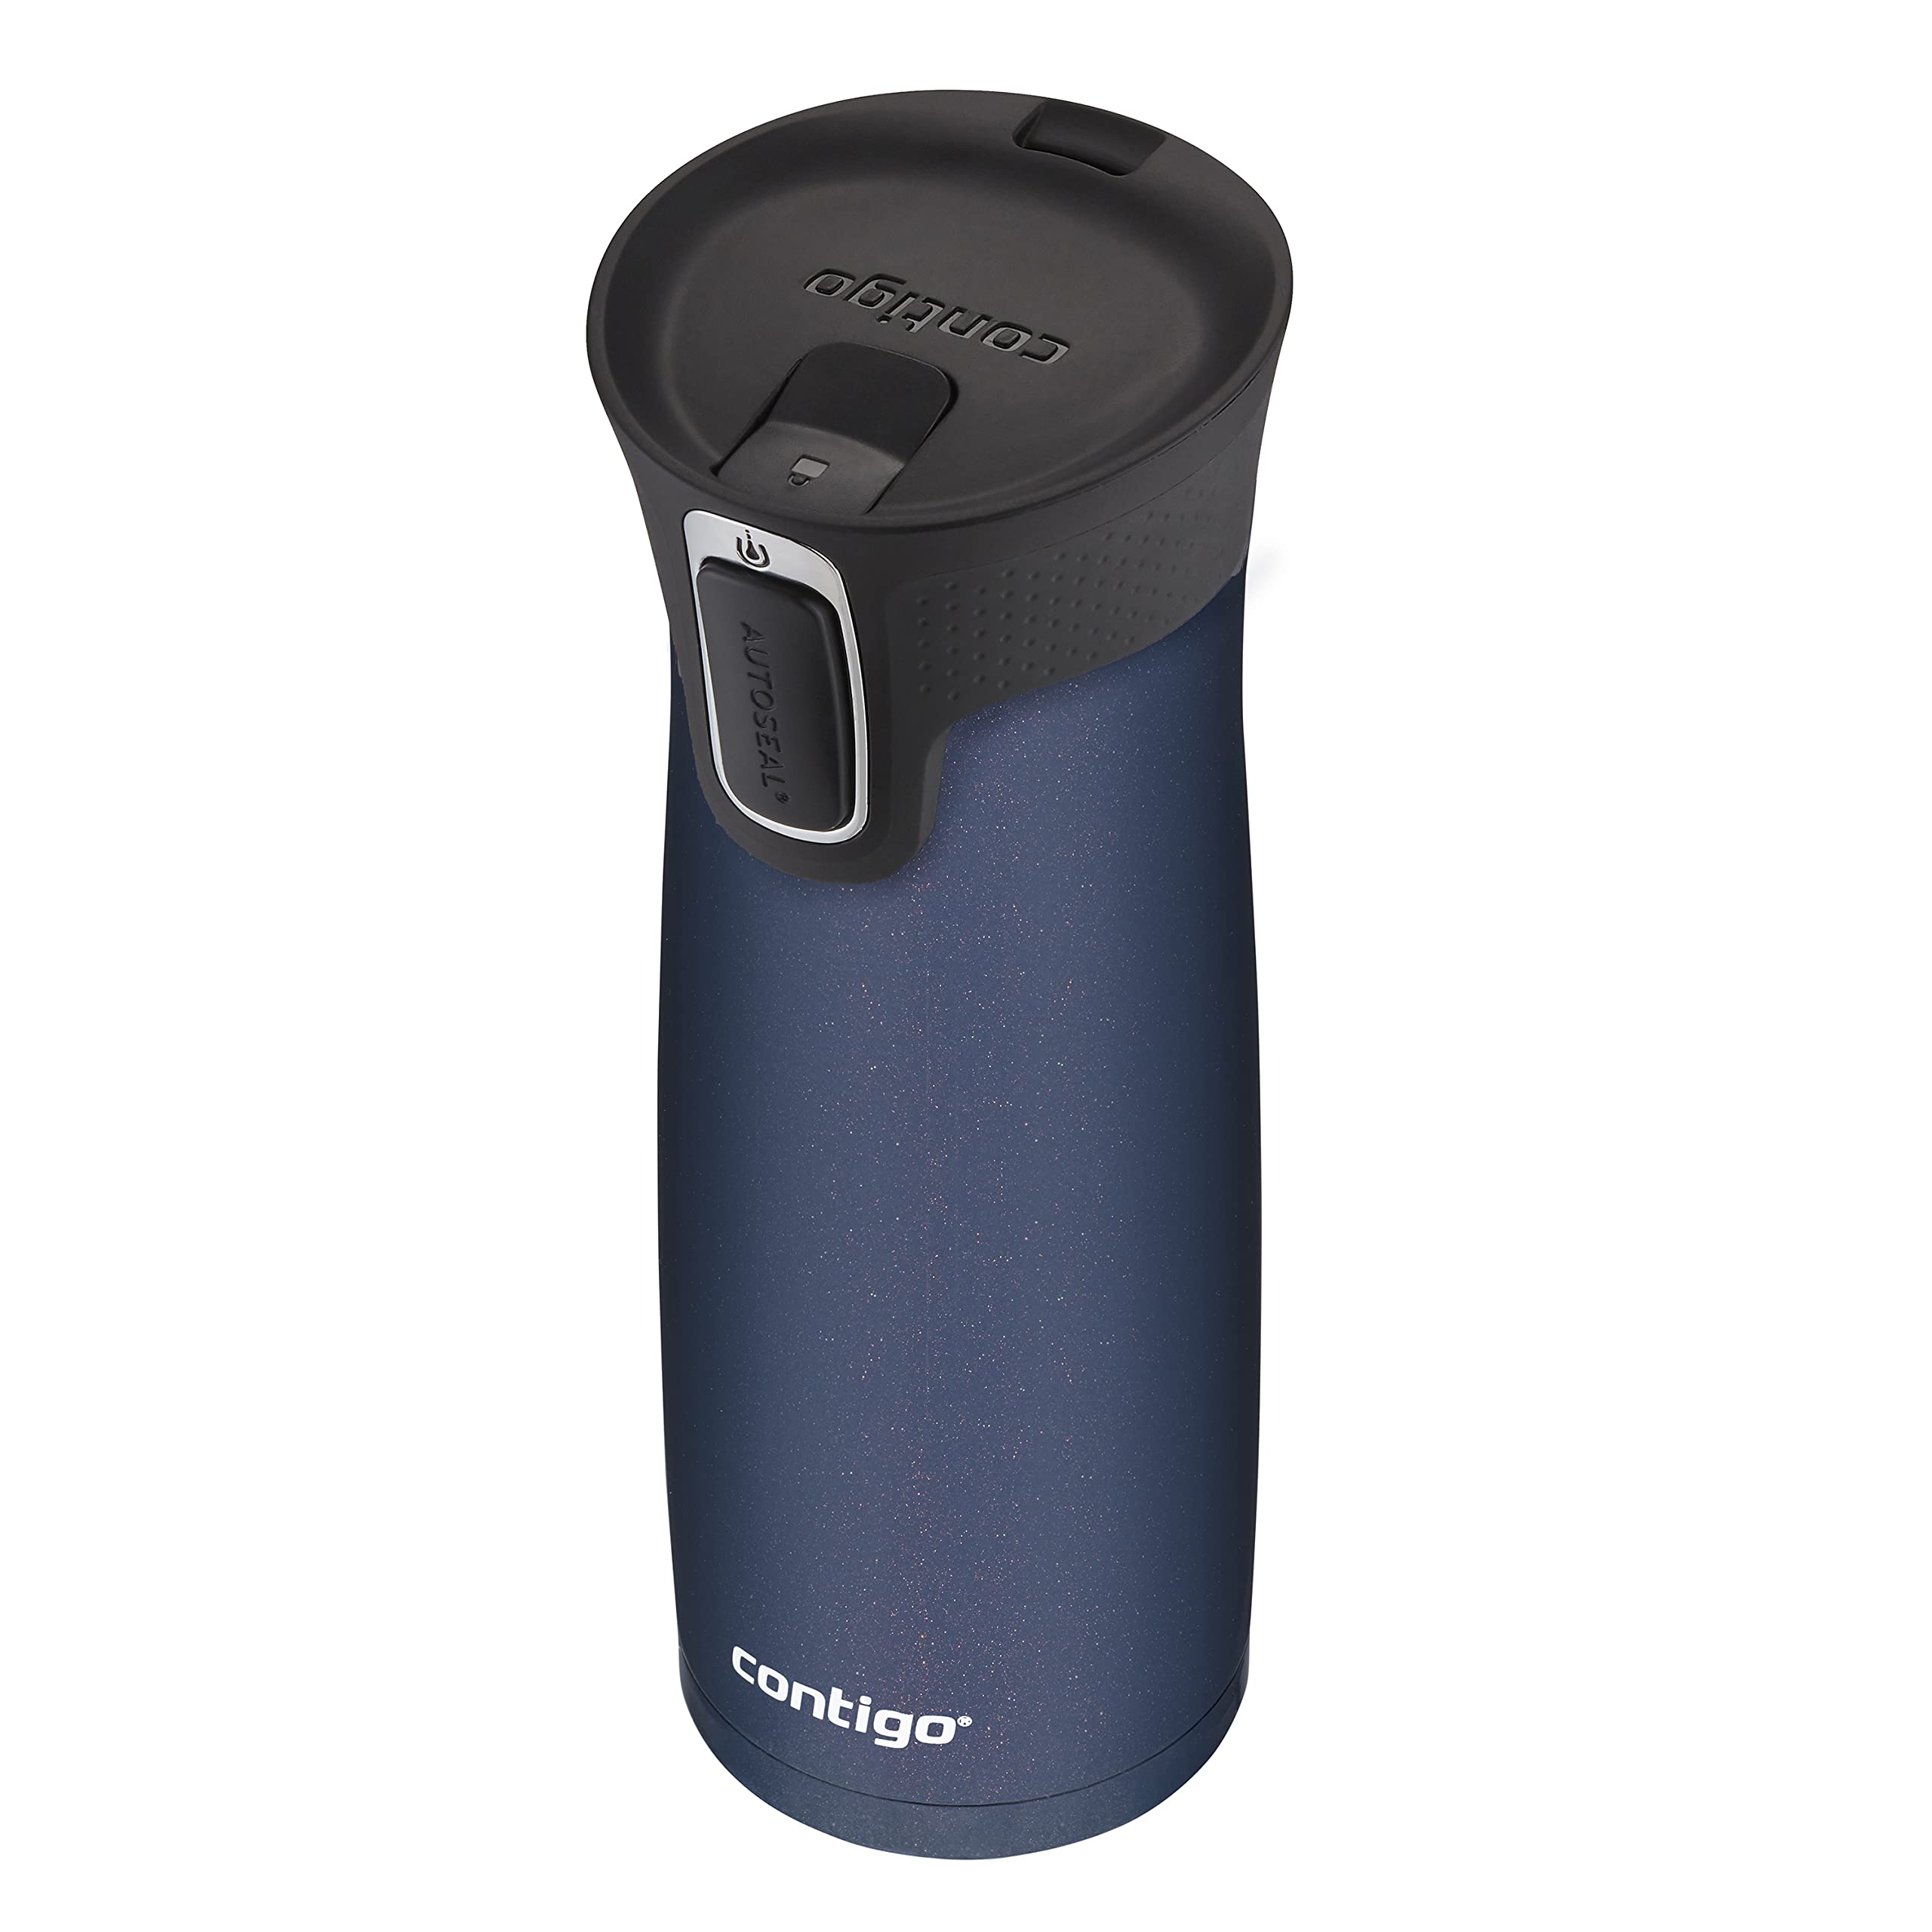 Contigo West Loop Stainless Steel Vacuum-Insulated Travel Mug with Spill-Proof Lid